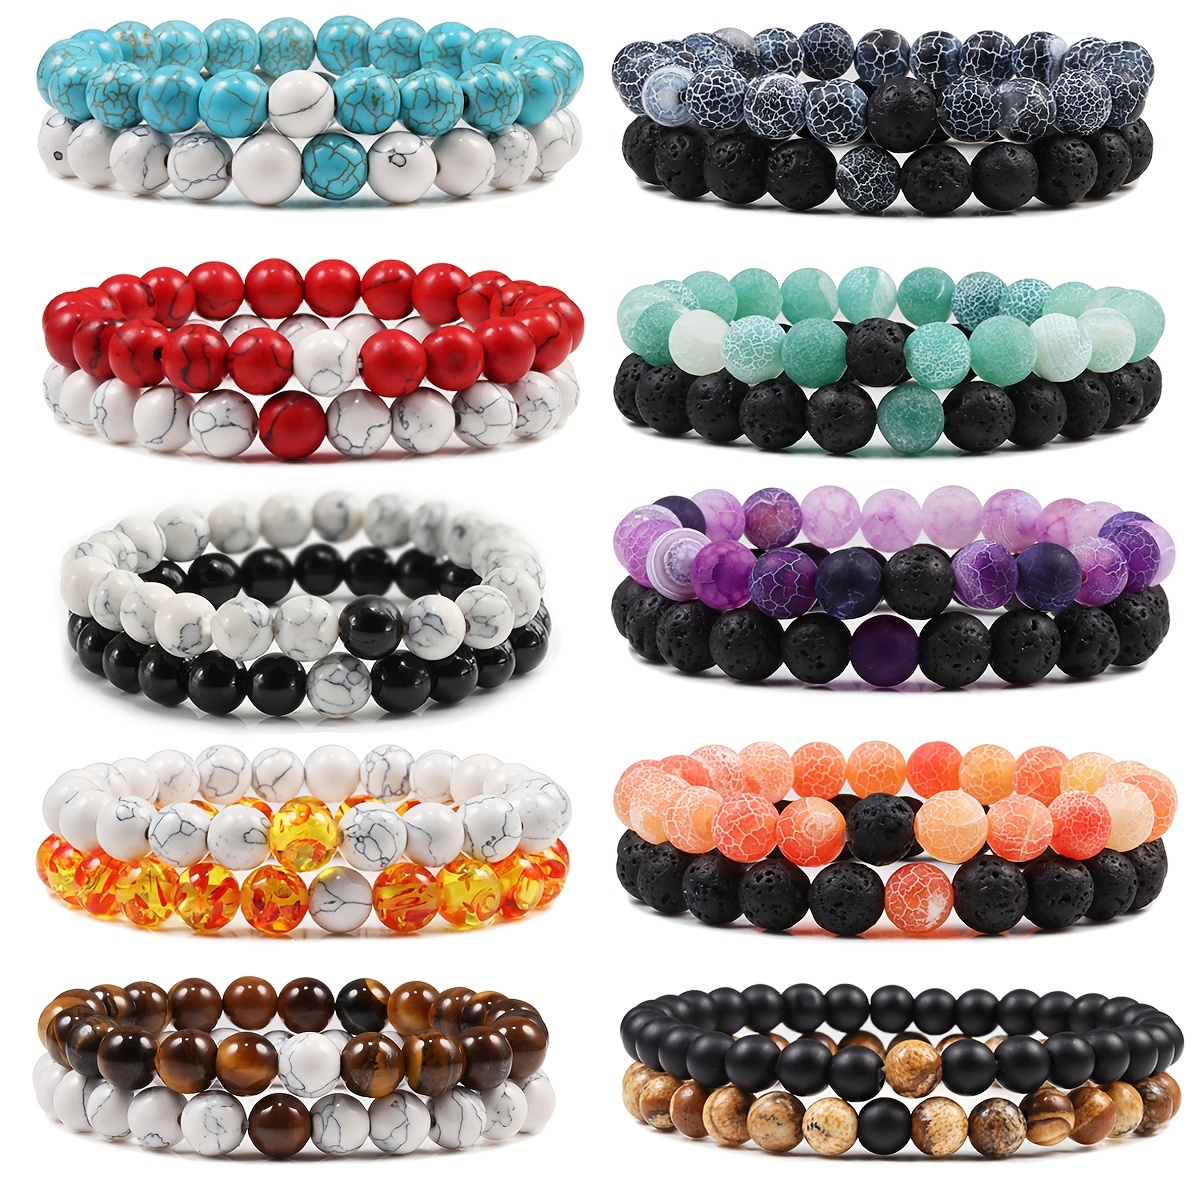 Stone Healing Bead Bracelets (6mm) – Max and Herb